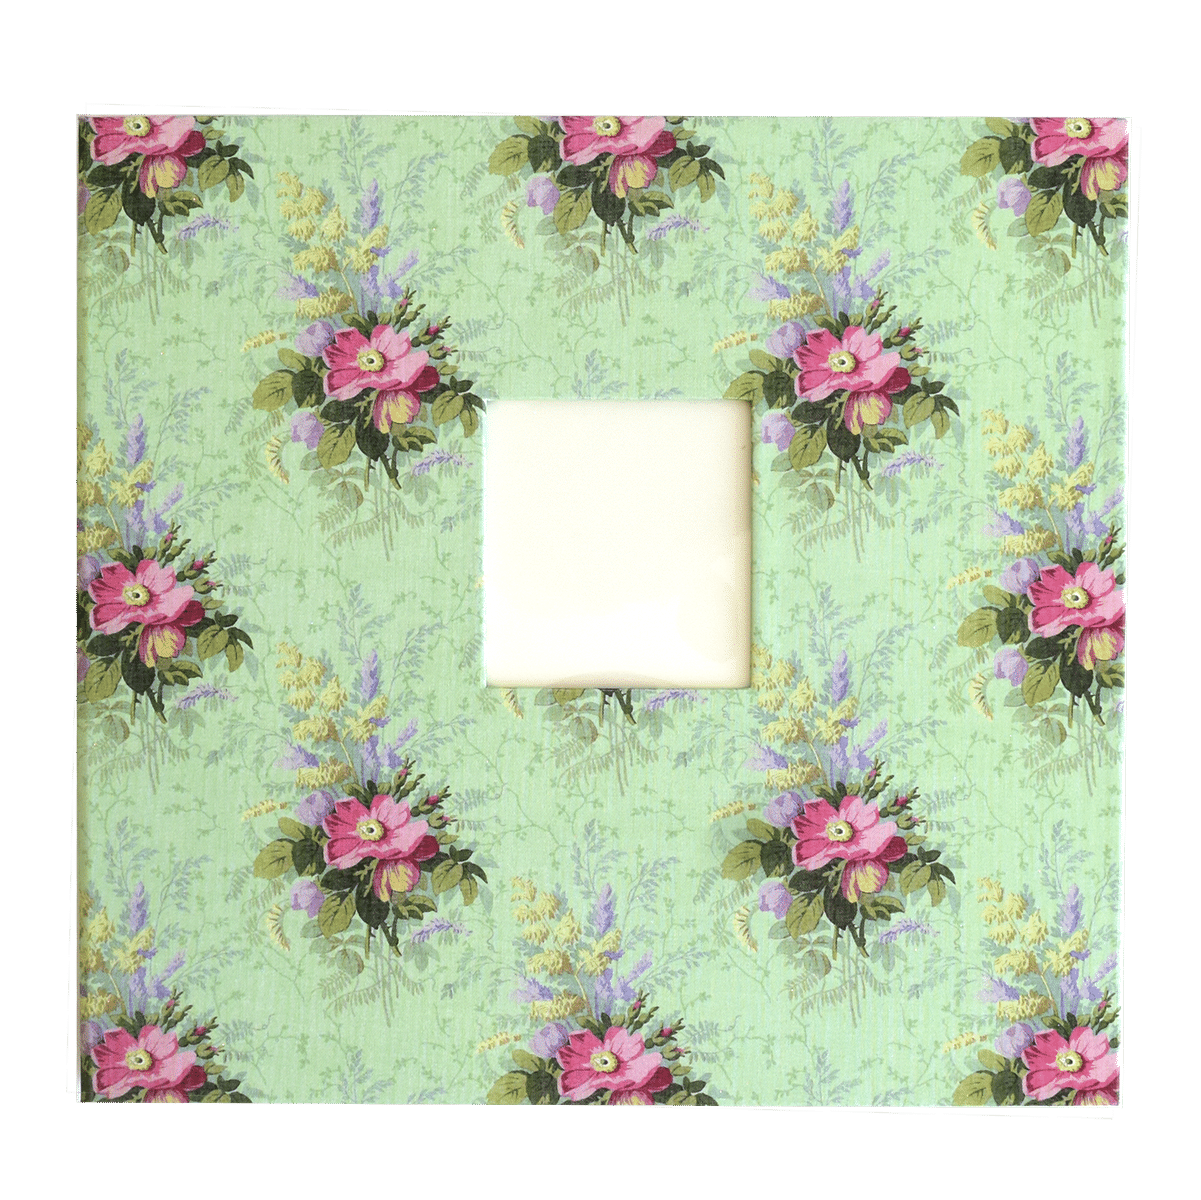 a picture frame with pink flowers on a green background.